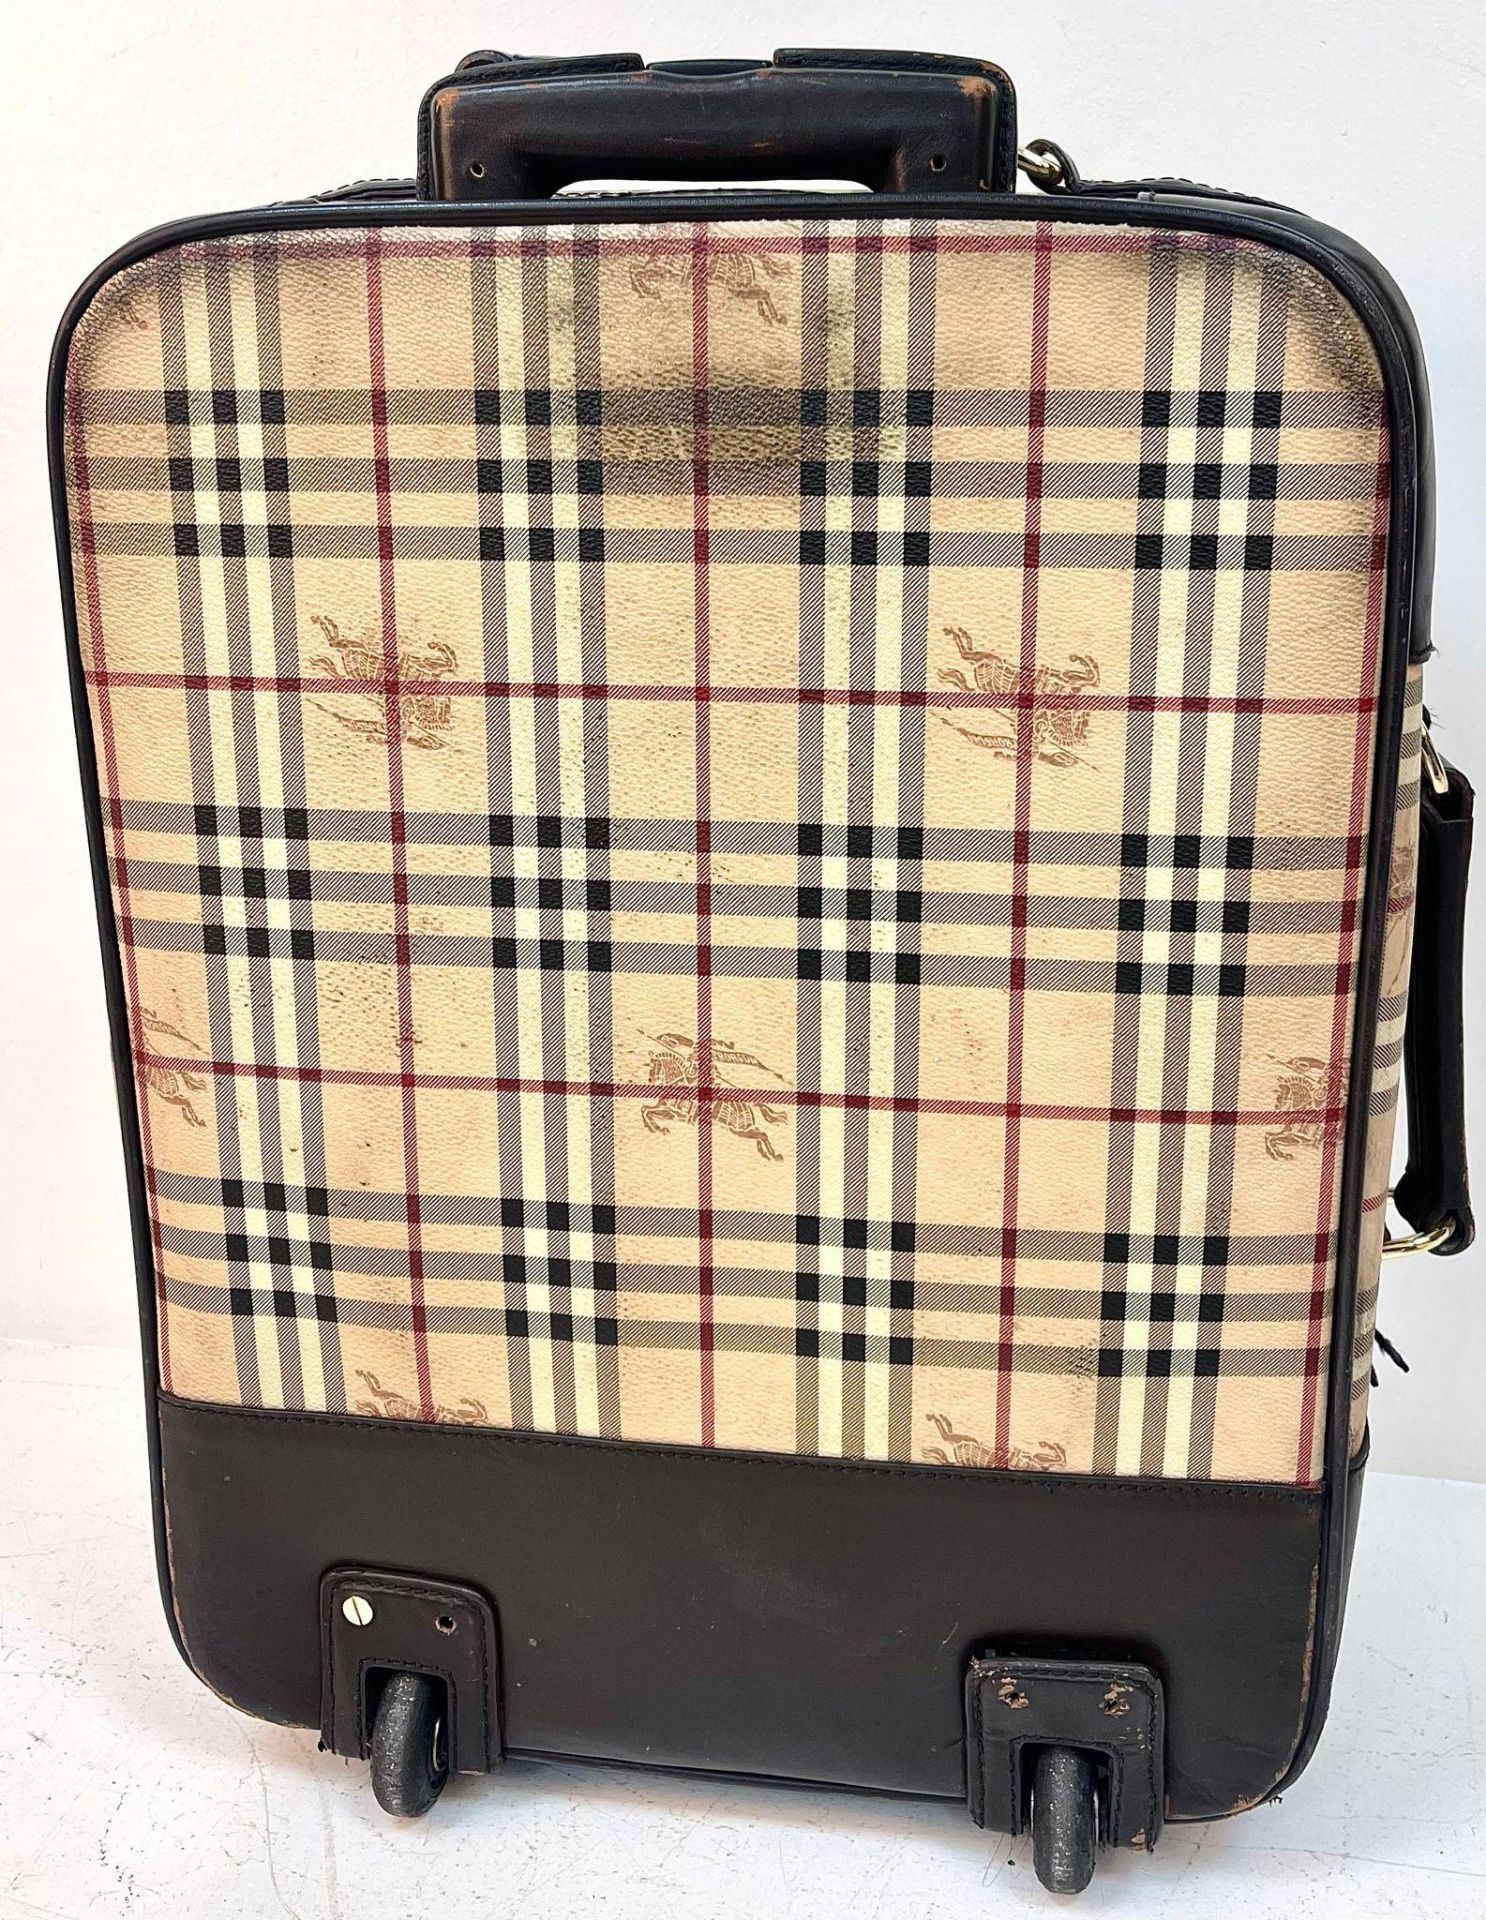 A BURBERRY "CARRY ON" SUITCASE WITH CLASSIC BURBERRY LIVERY. 36 X 52cms - Image 2 of 5